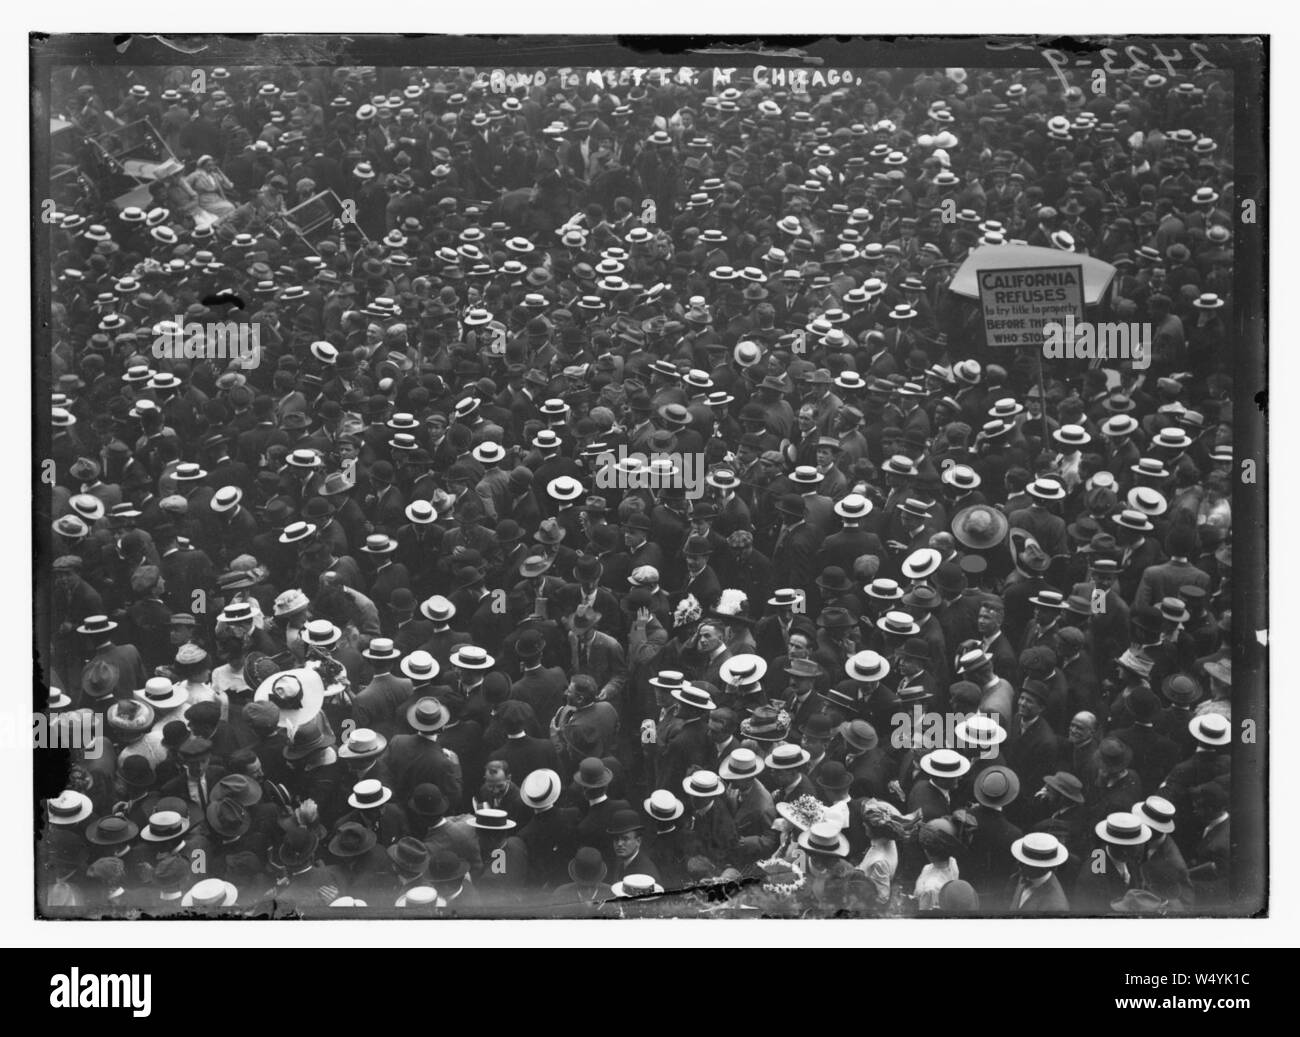 Crowd to meet T.R. (Theodore Roosevelt) at Chicago Stock Photo